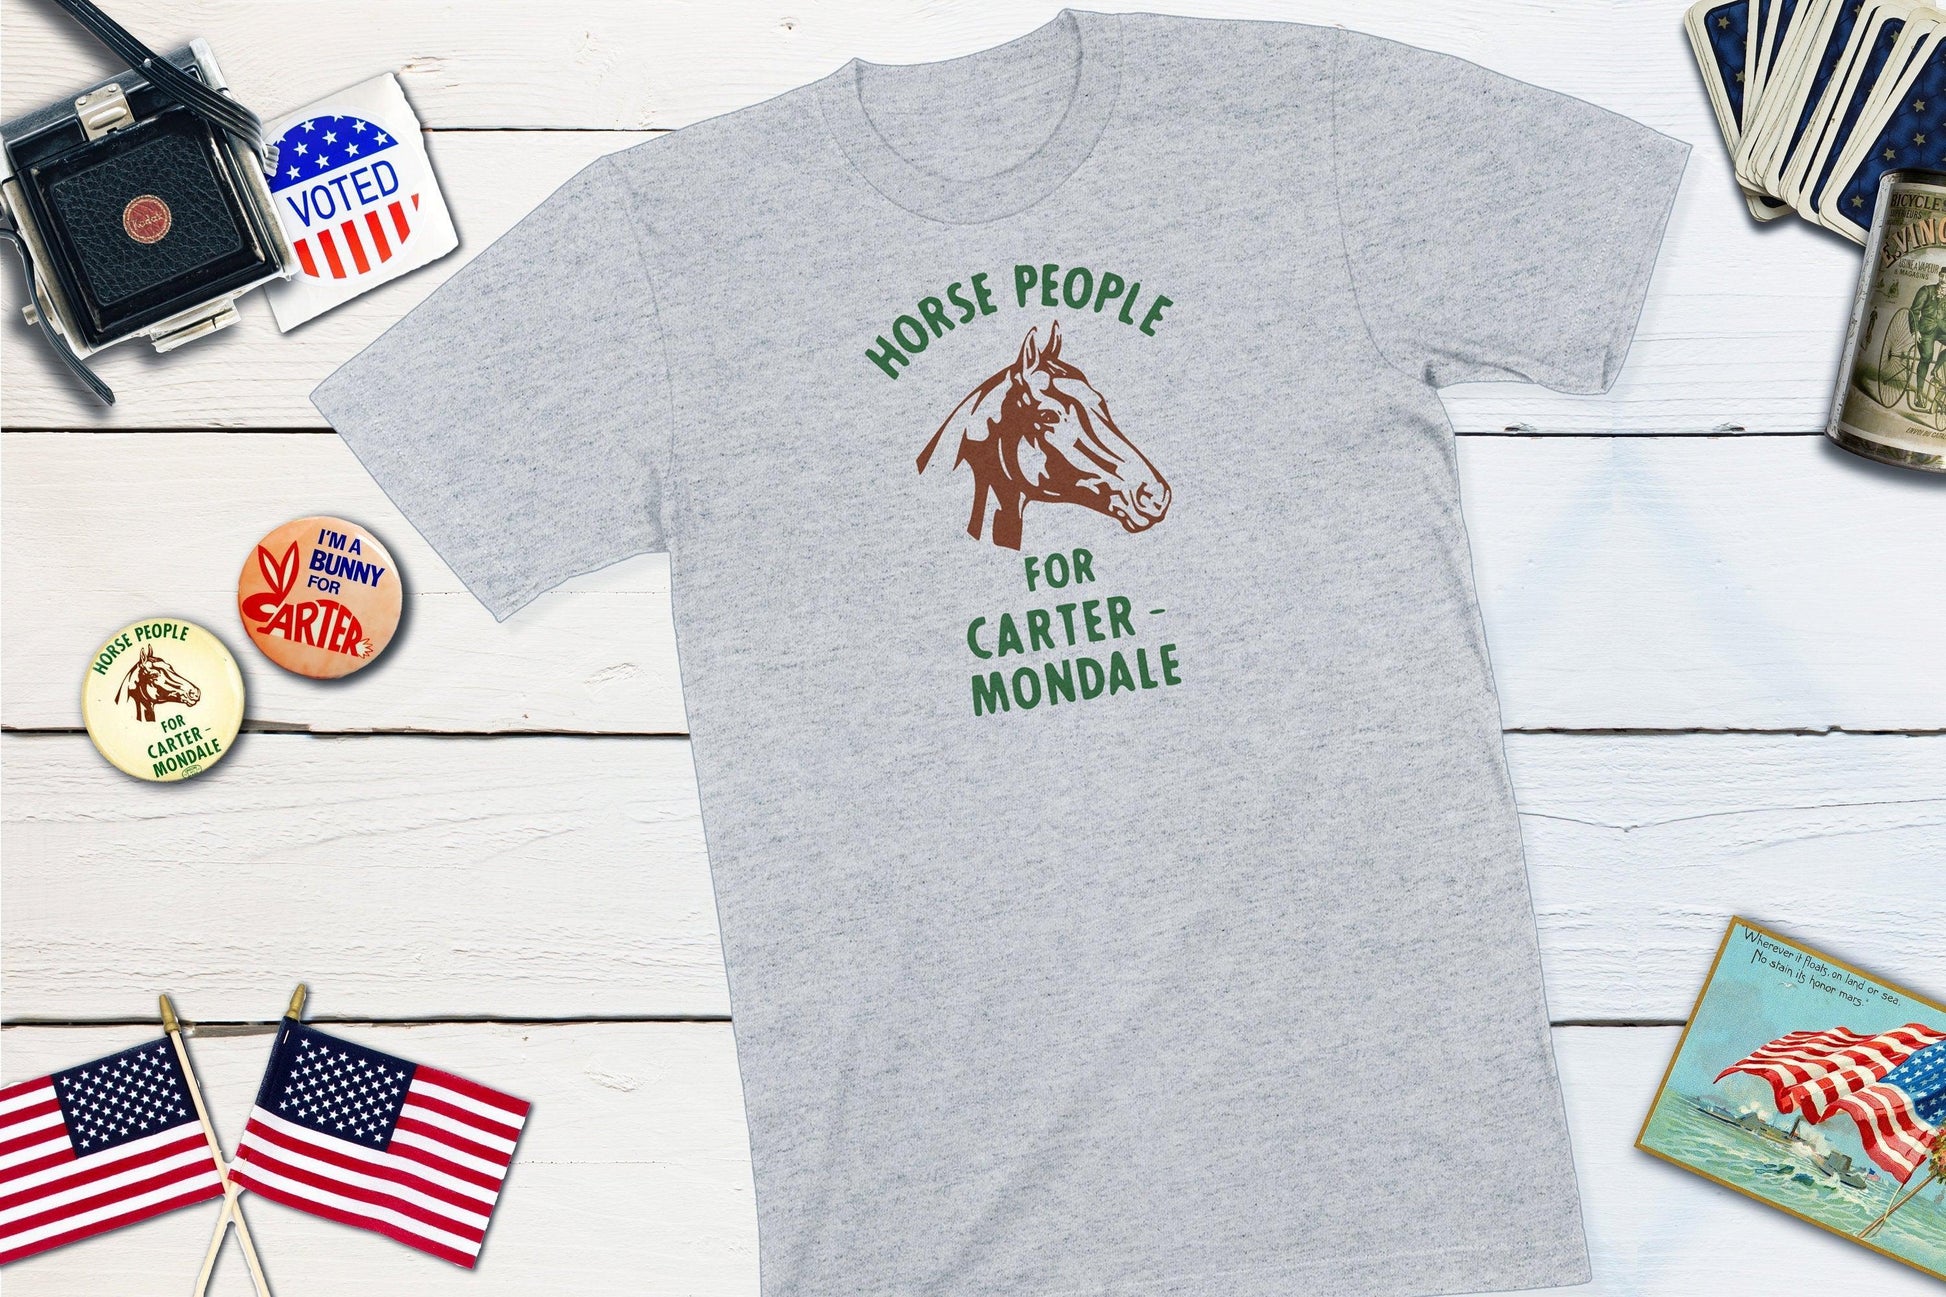 Horse People For Carter & Mondale - Jimmy Carter Presidential Campaign Button-Unisex T-shirt-Yesteeyear